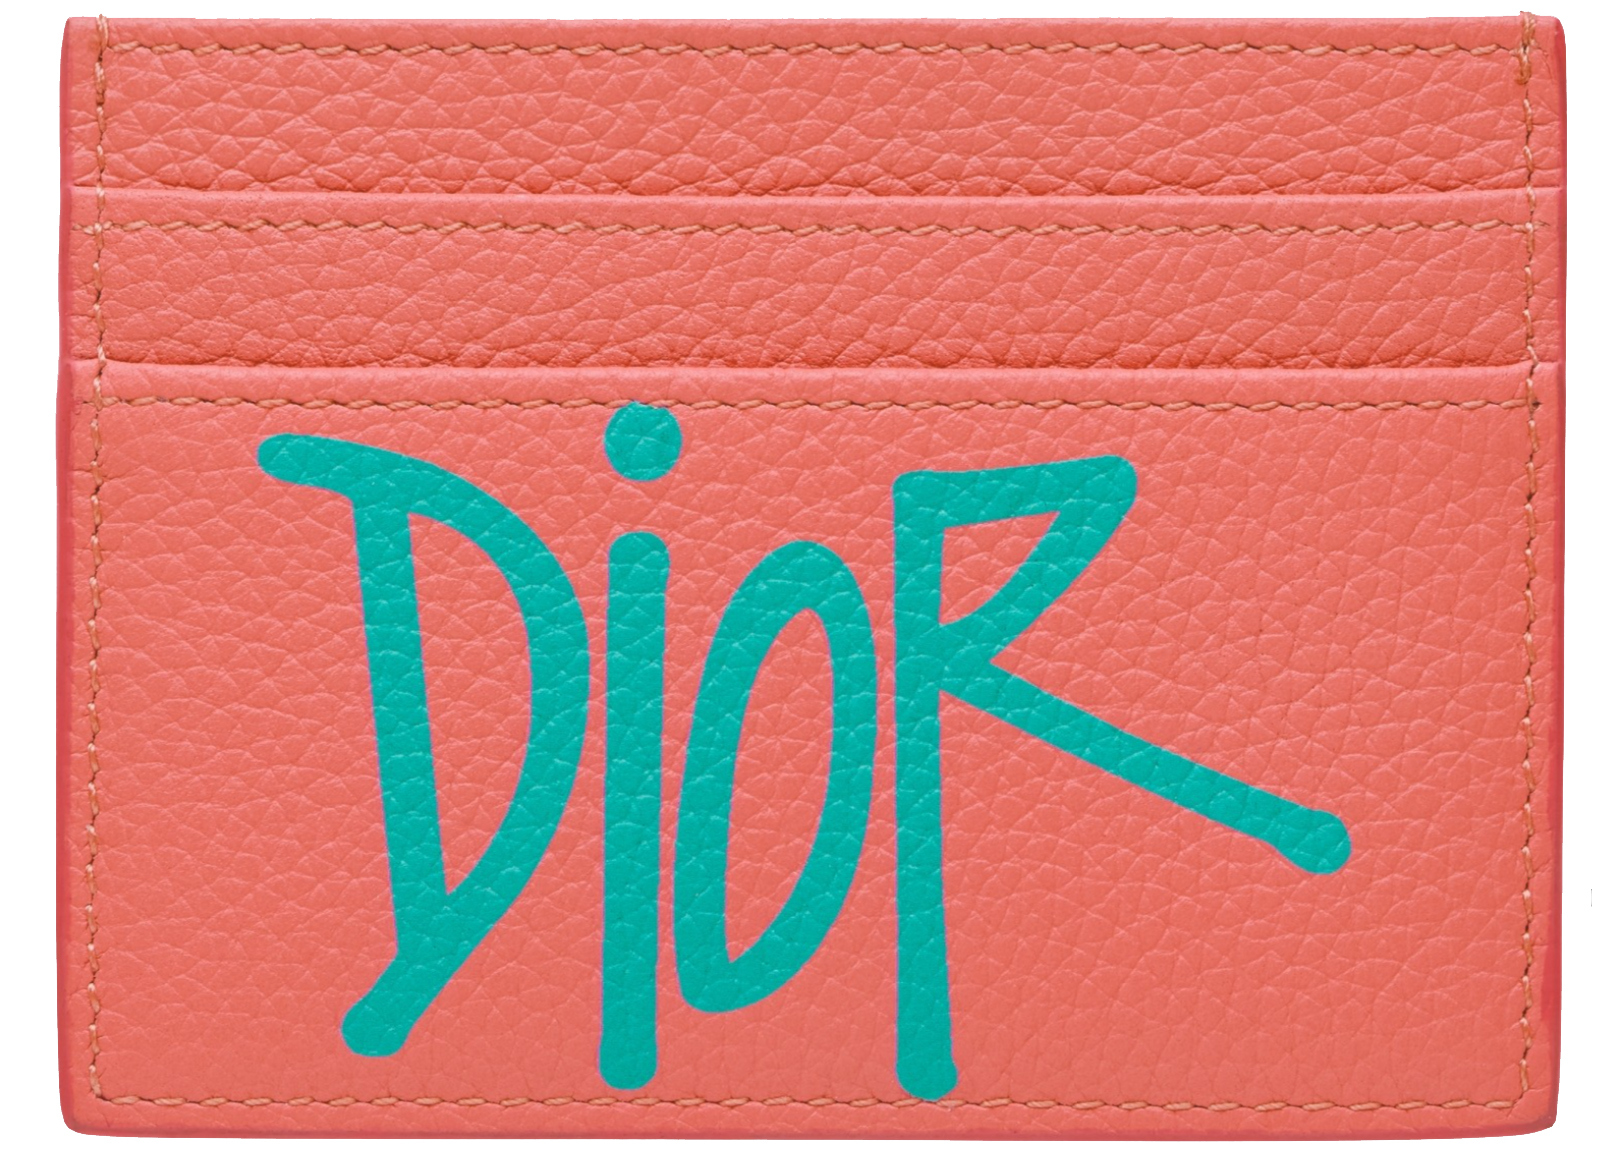 Dior And Shawn Card Holder (4 Card Slot) Pink/Green in Grained